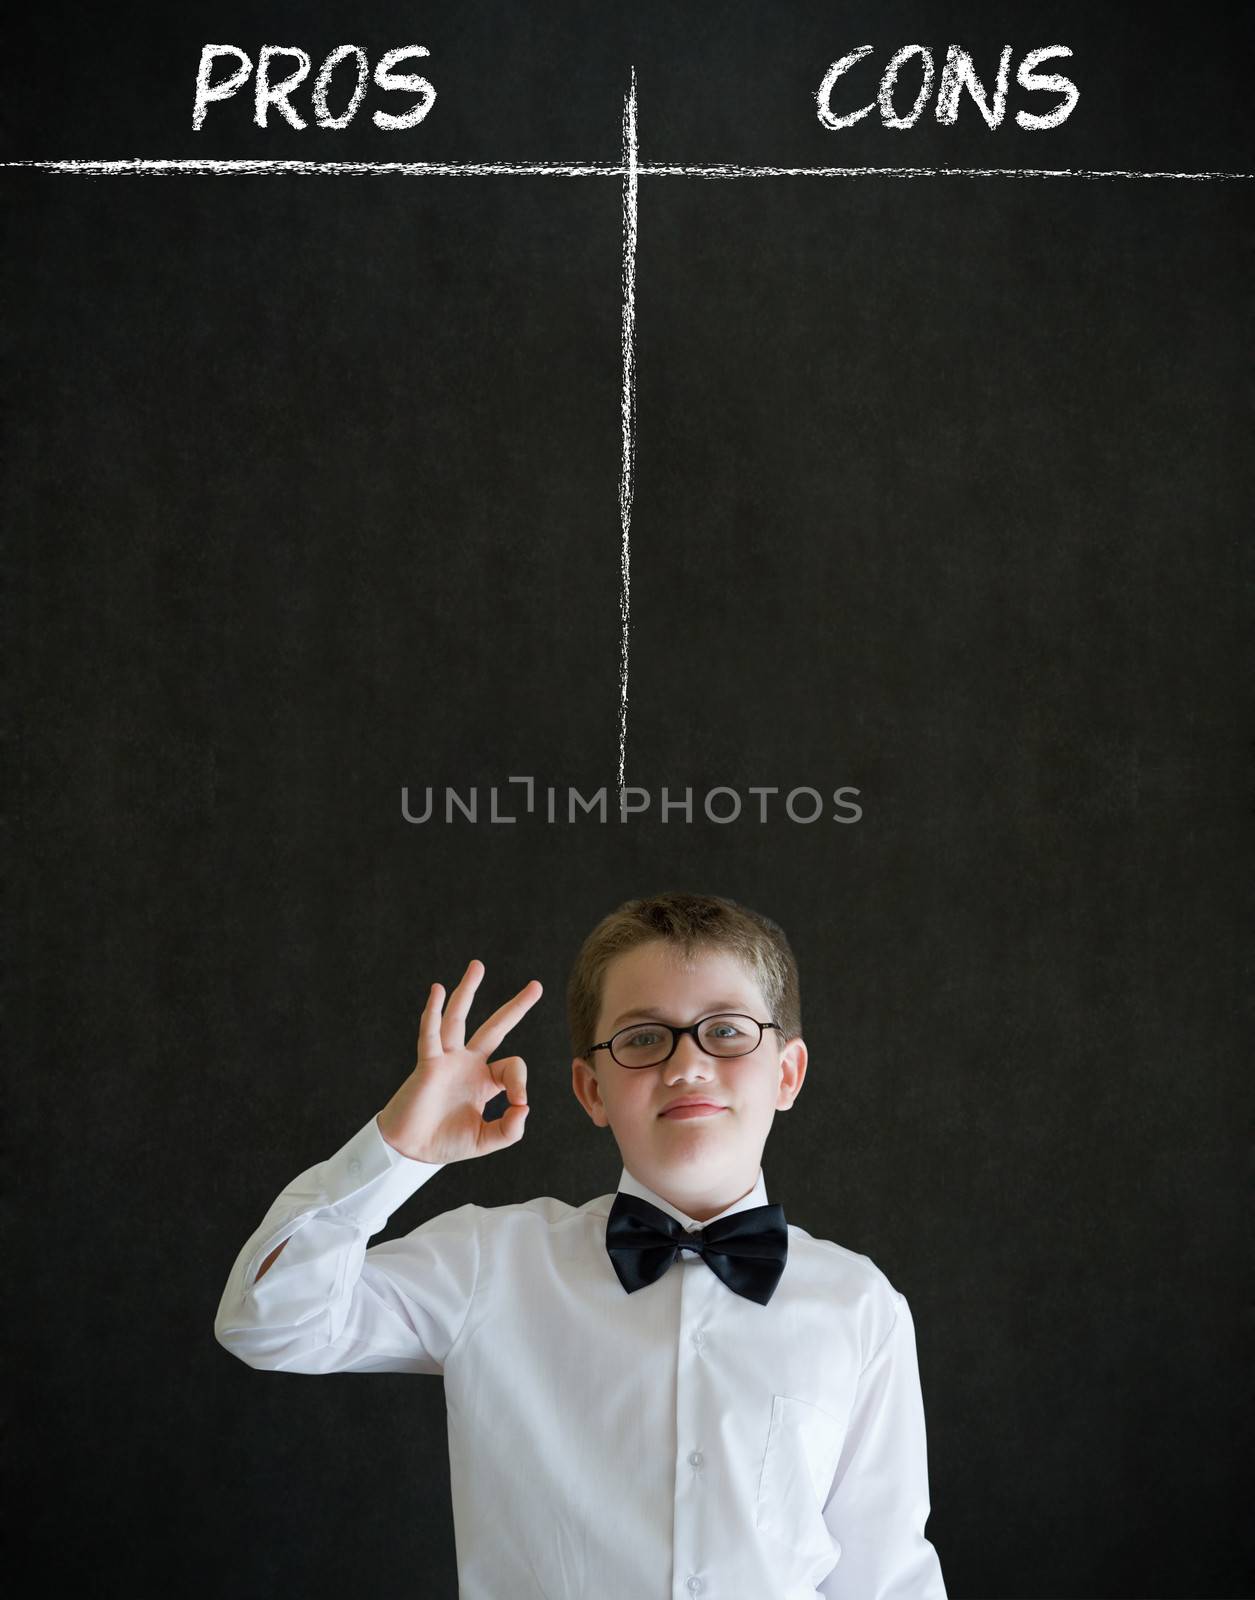 All ok or okay sign boy dressed up as business man with chalk pros and cons decision list on blackboard background